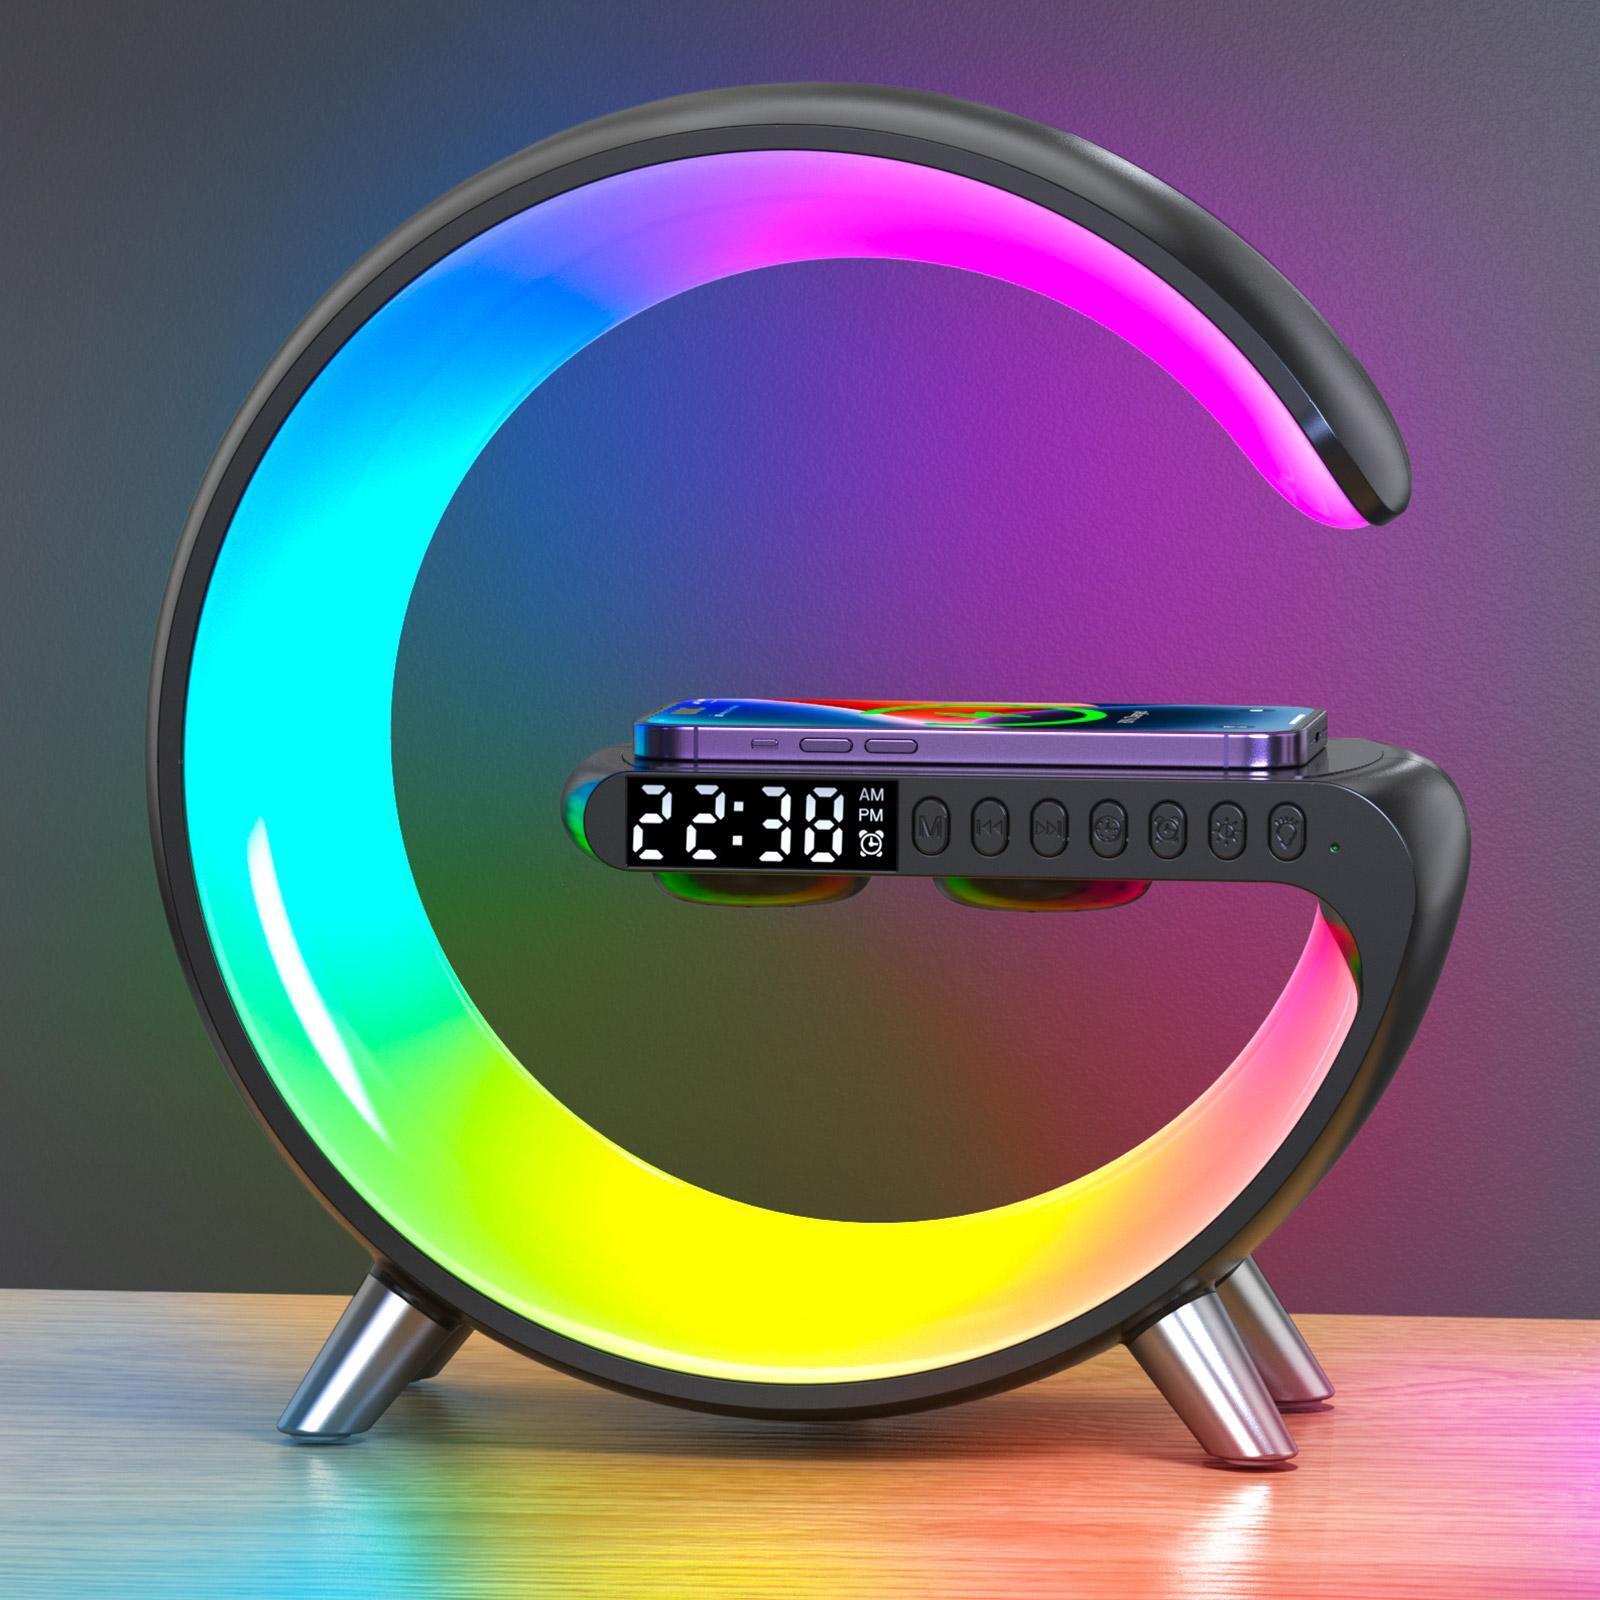 🔥Early Christmas Hot Sale💡Multifunctional Wireless Charger Alarm Clock Speaker💡FREE SHIPPING NOW!